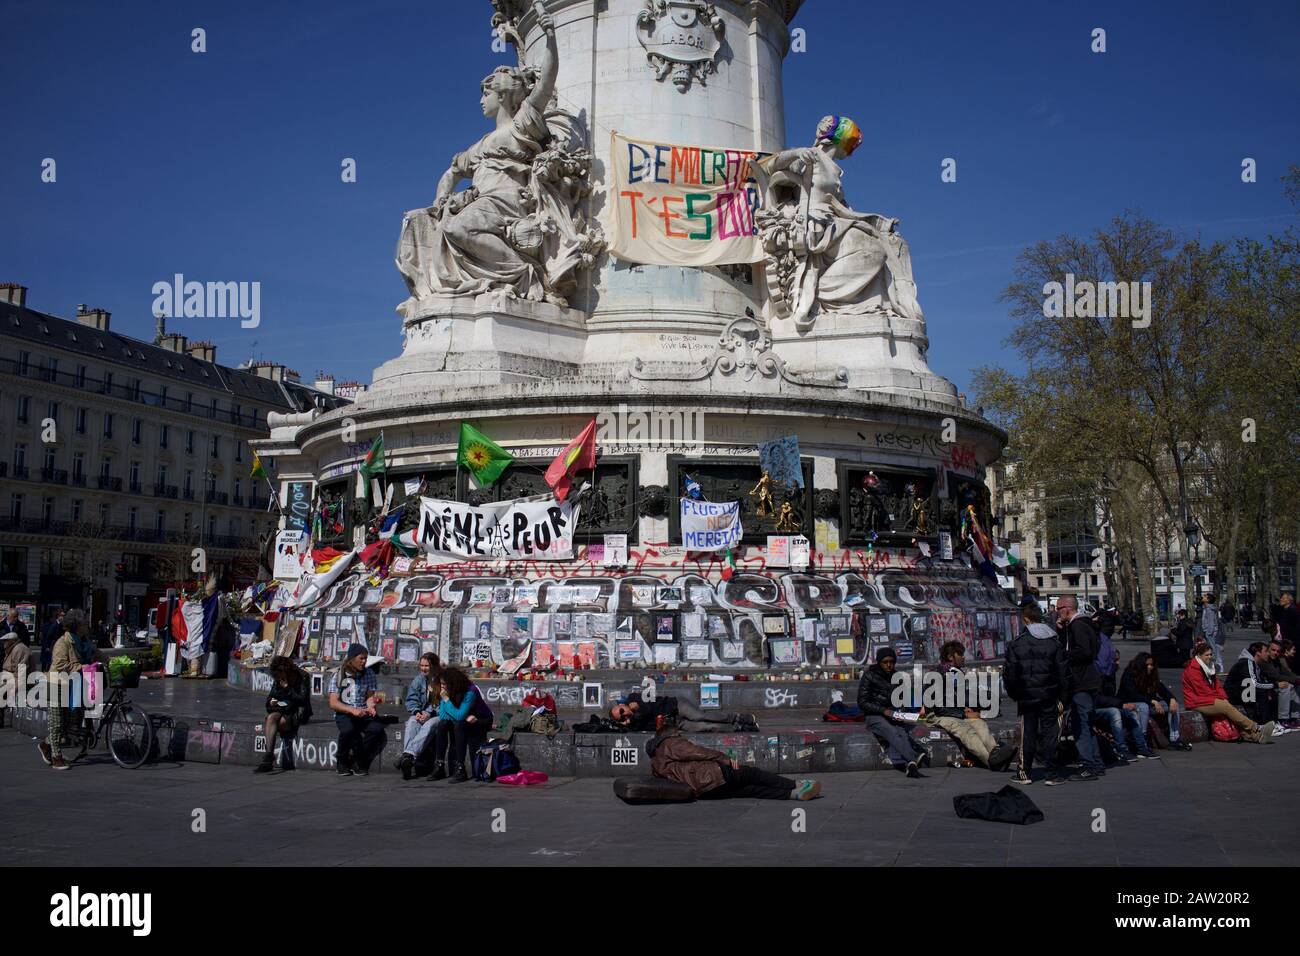 People sitting on steps of Marianne statue in front of messages to remember victims of Paris and Brussels attacks, Place de la République, Paris, France - April 2016 Stock Photo